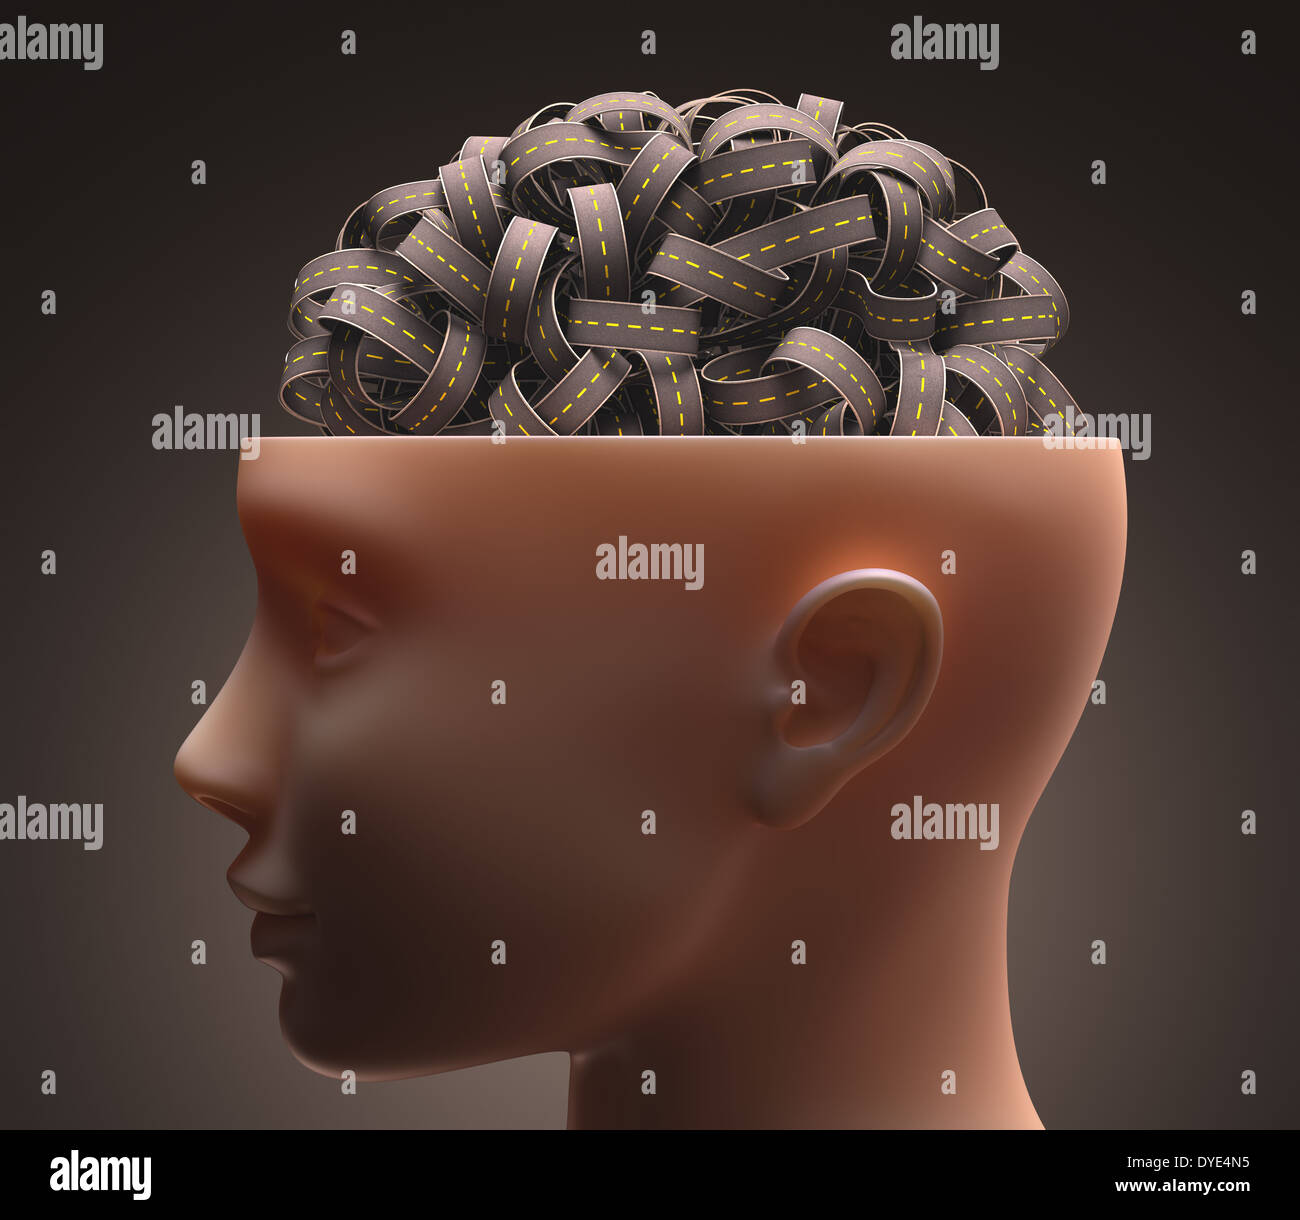 Several roads forming the human brain. Clipping path included. Stock Photo